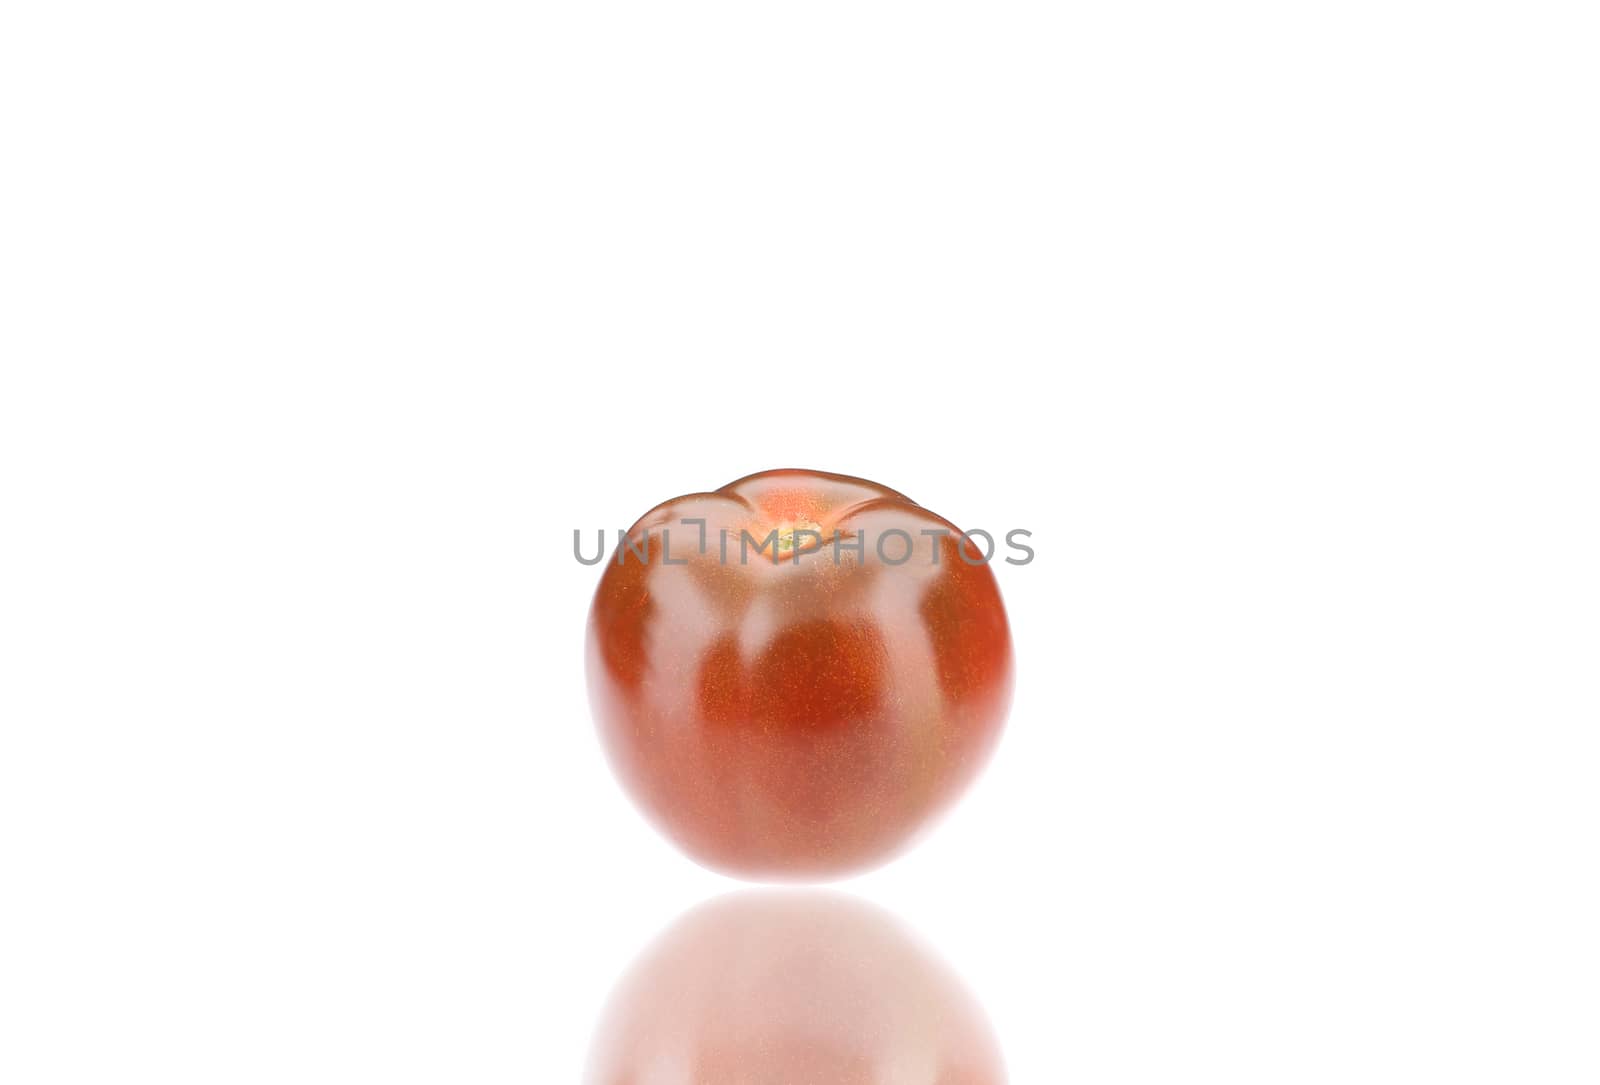 Close up of fresh tomato. Isolated on a white background.